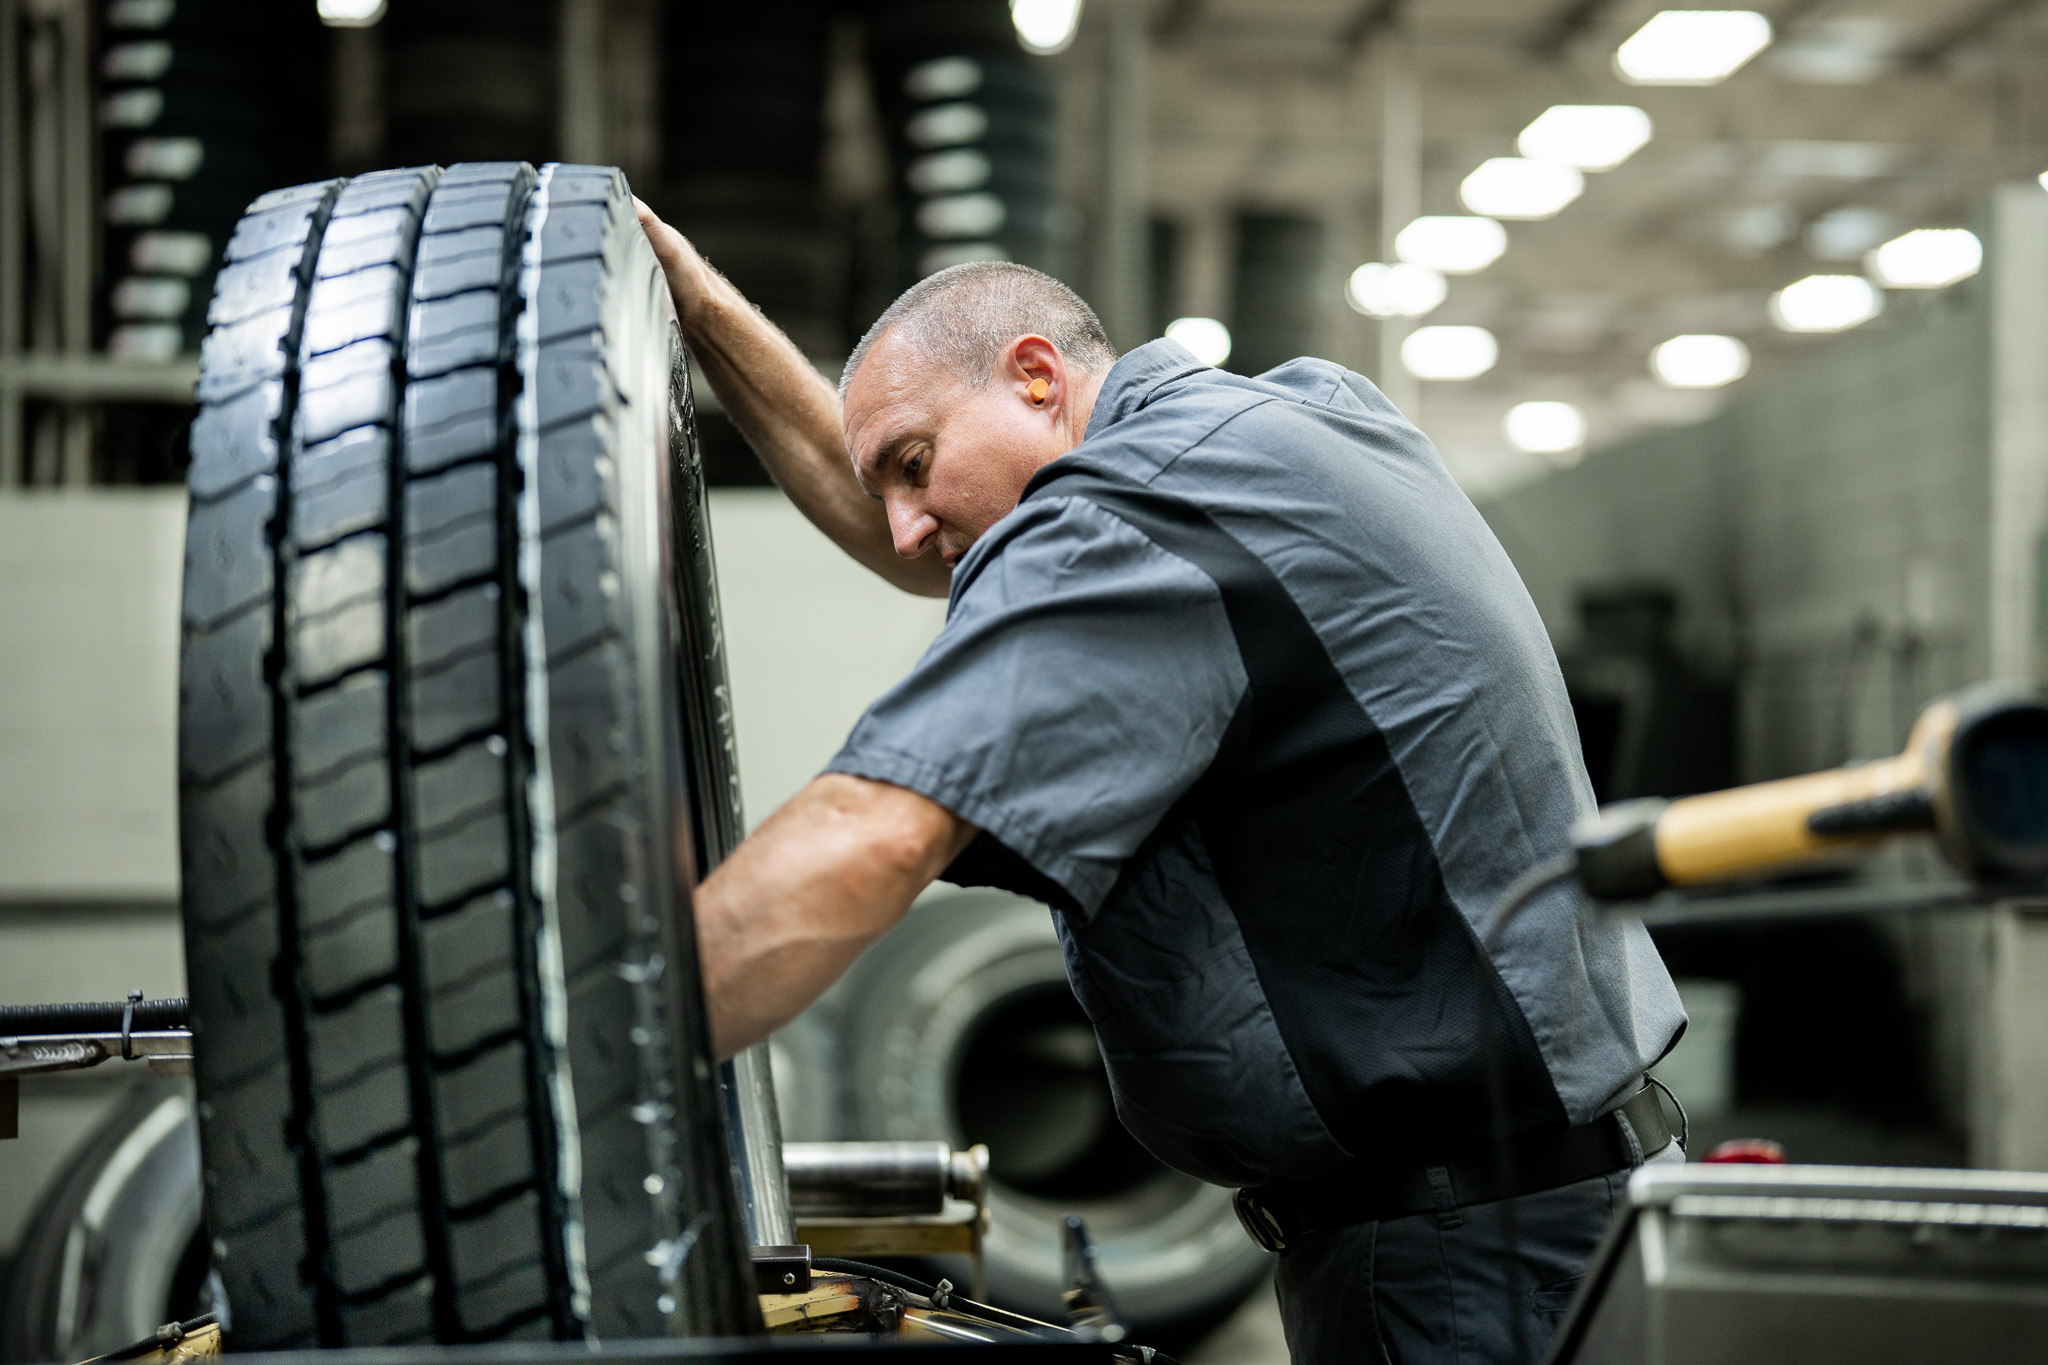 Inspecting commercial tire for safety